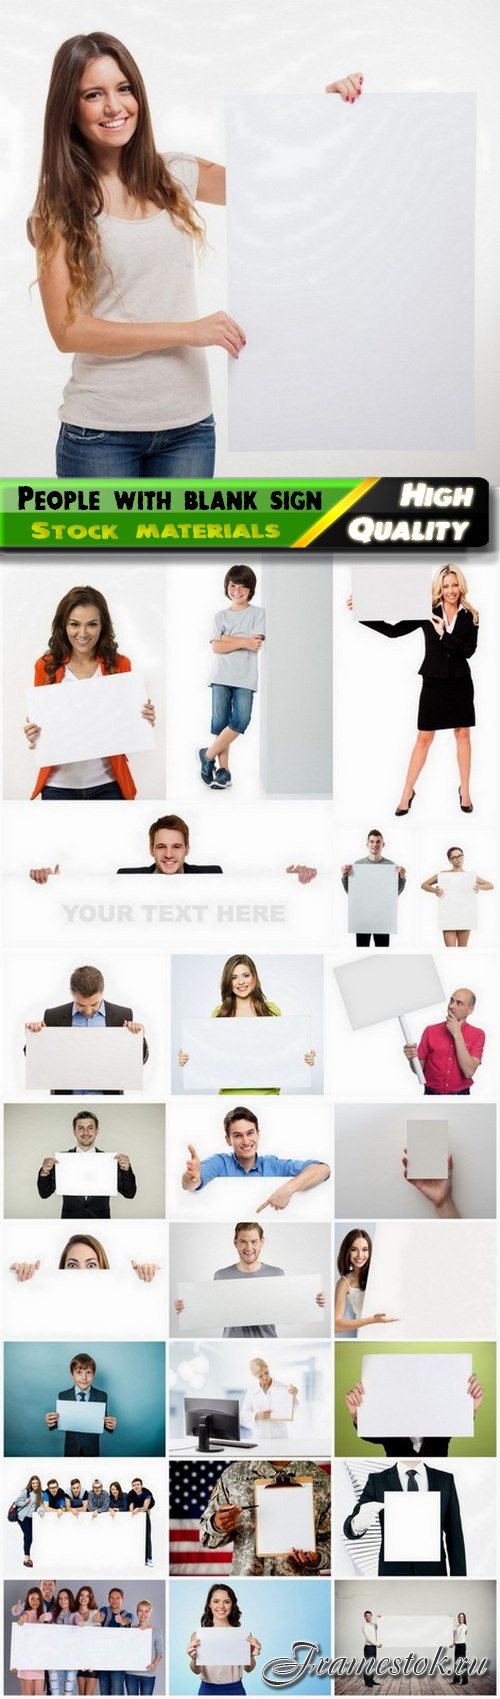 Business people with blank sign and card for advertising 25 HQ Jpg